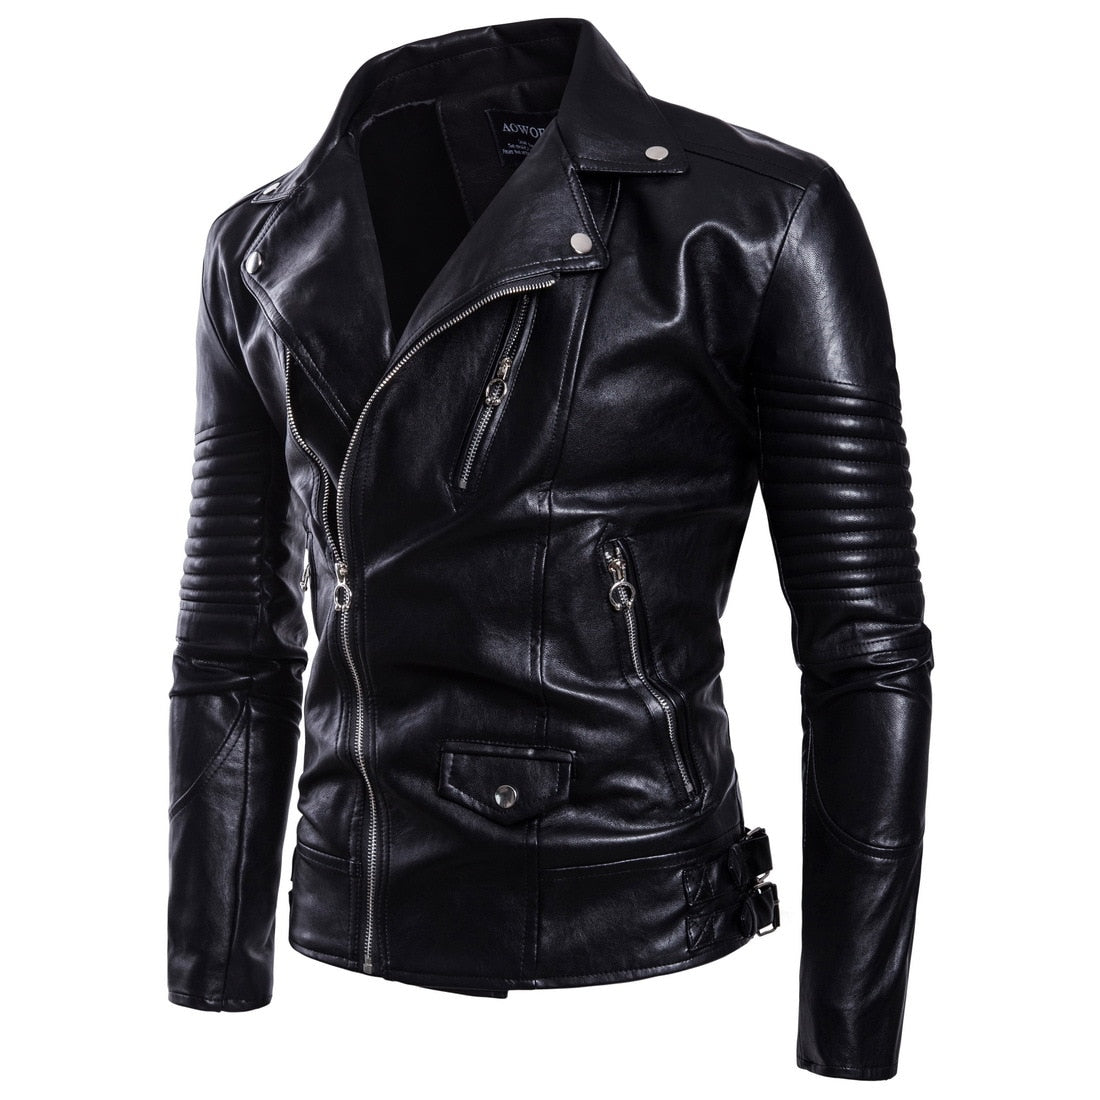 Ambition Leather Jacket – Goth N' Rock